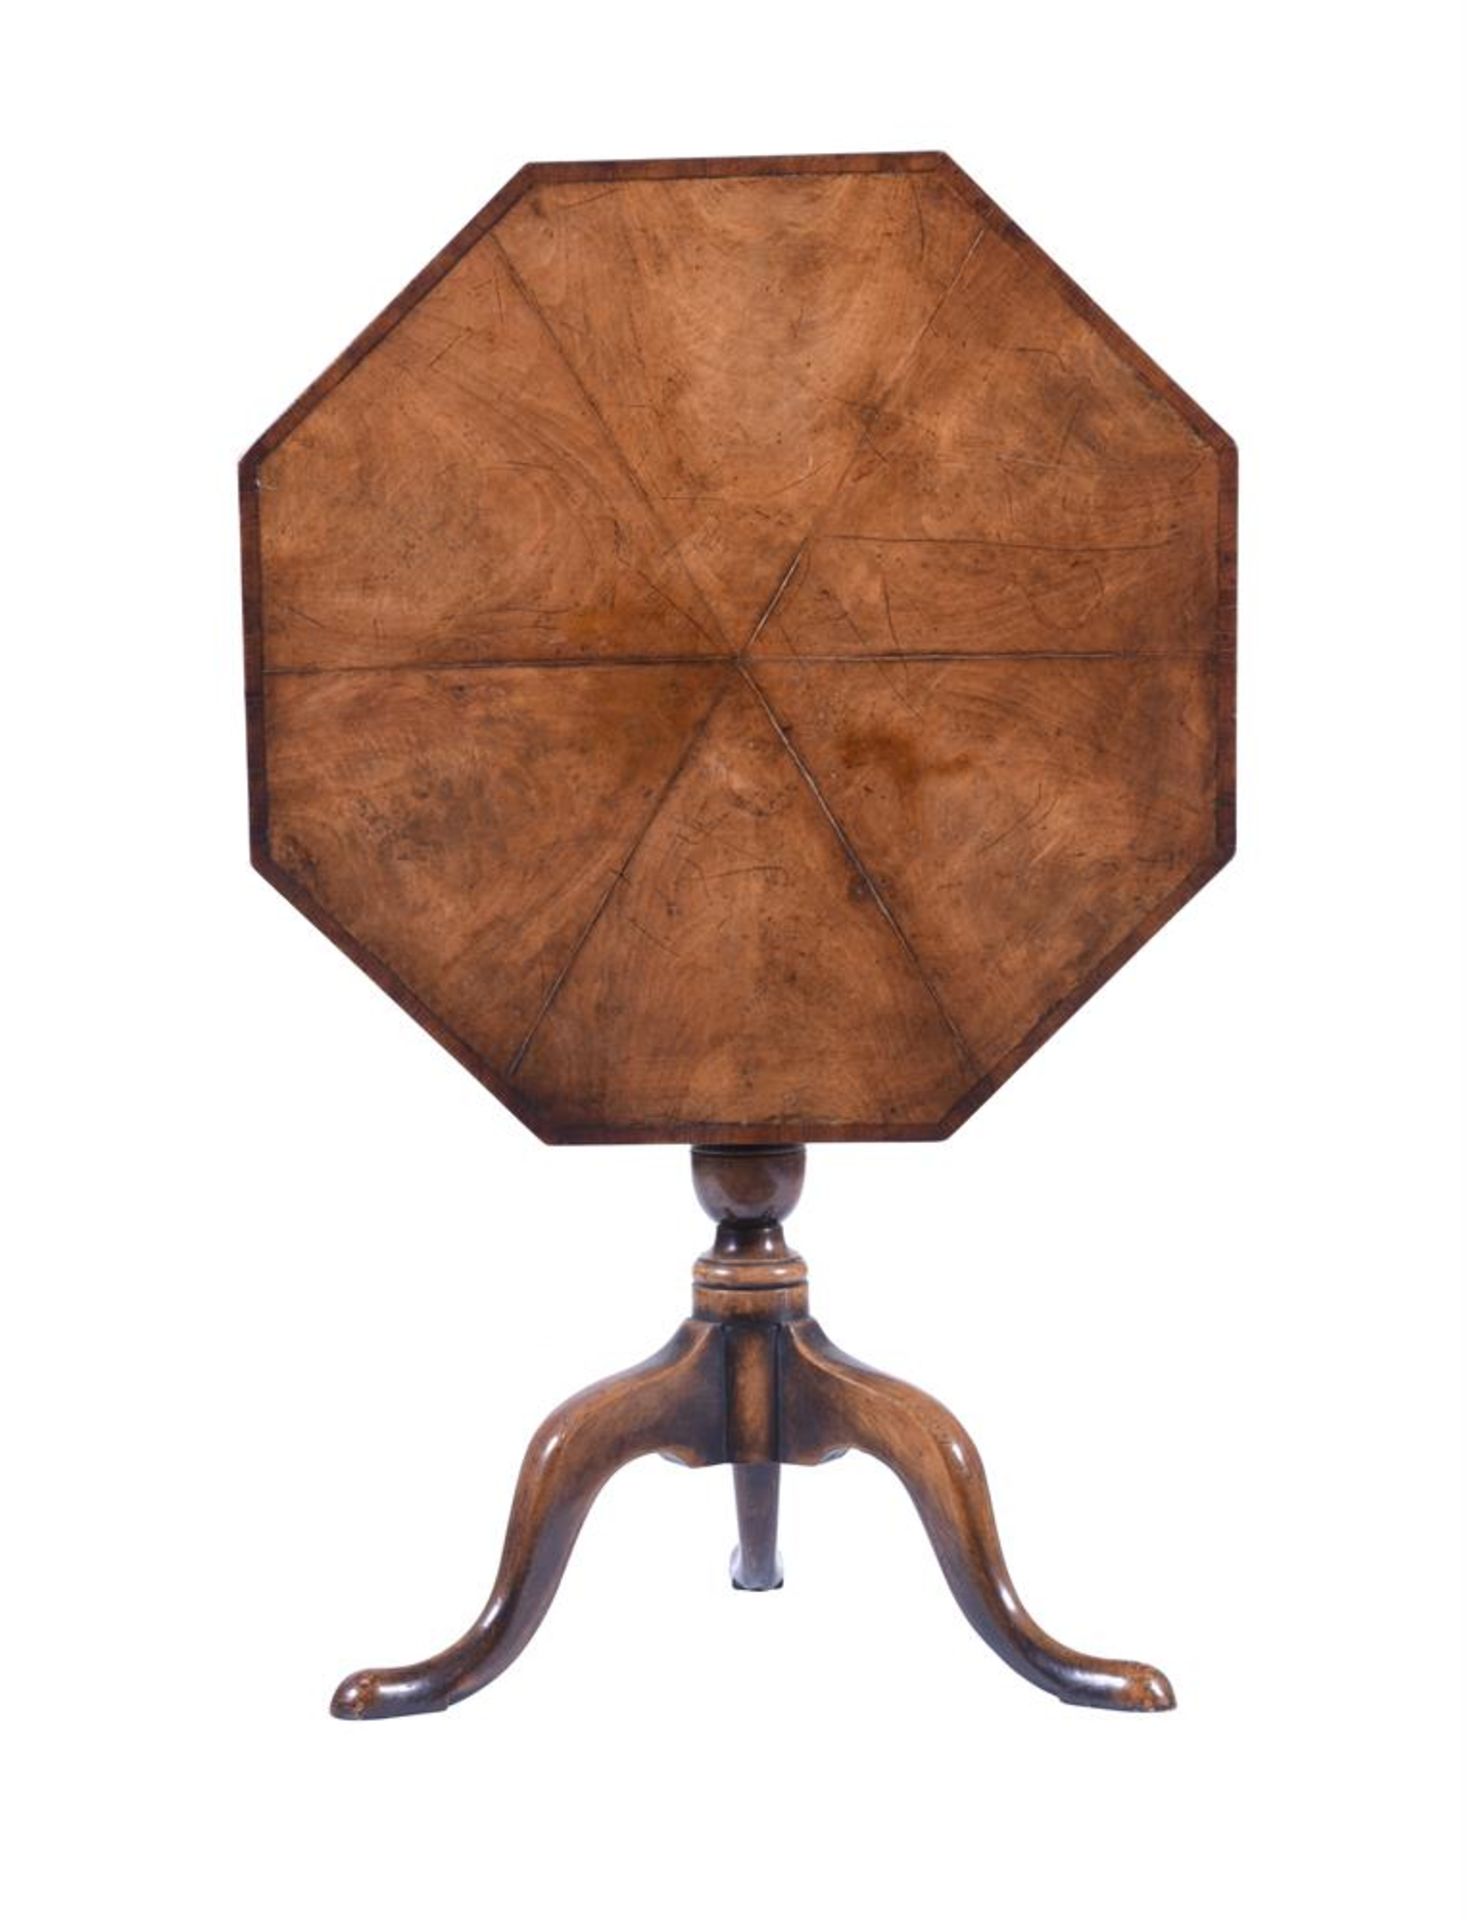 A WALNUT AND YEW BANDED OCTAGONAL TRIPOD TABLE, IN GEORGE II STYLE